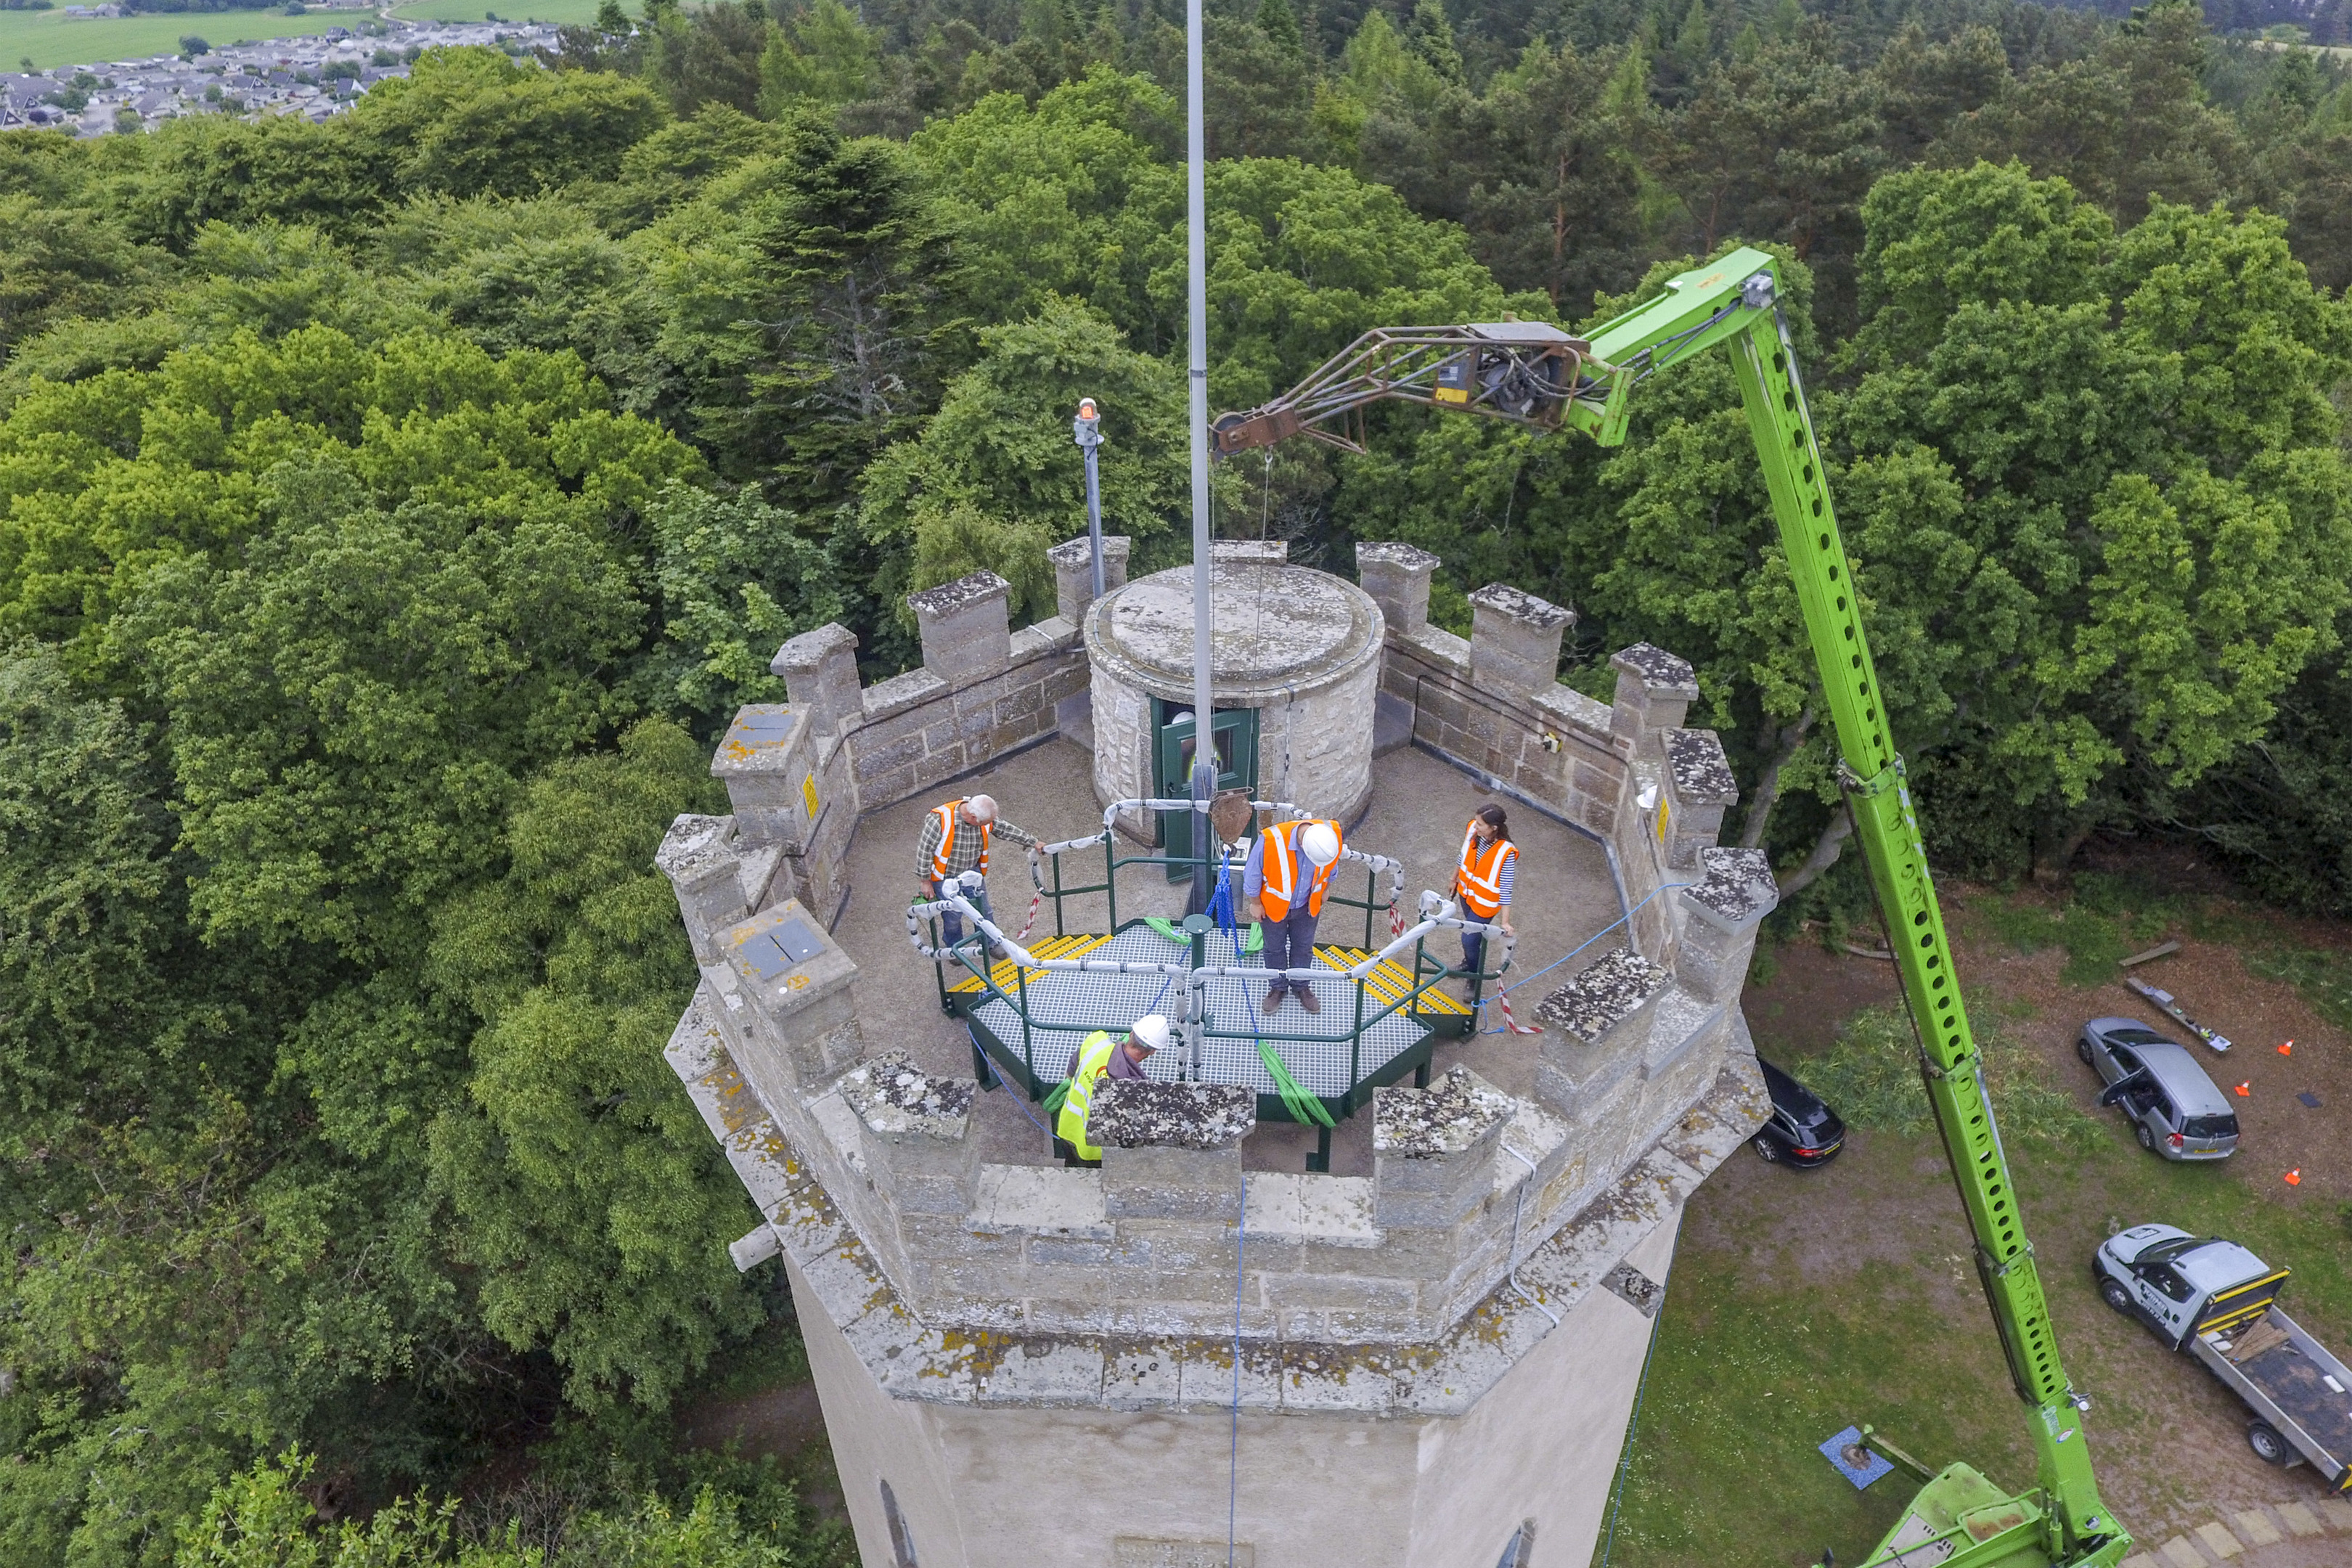 AJ Engineering installed a viewing platform on the roof of Nelson's Tower in Forres, using a telescopic crane. Picture: Marc Hindley